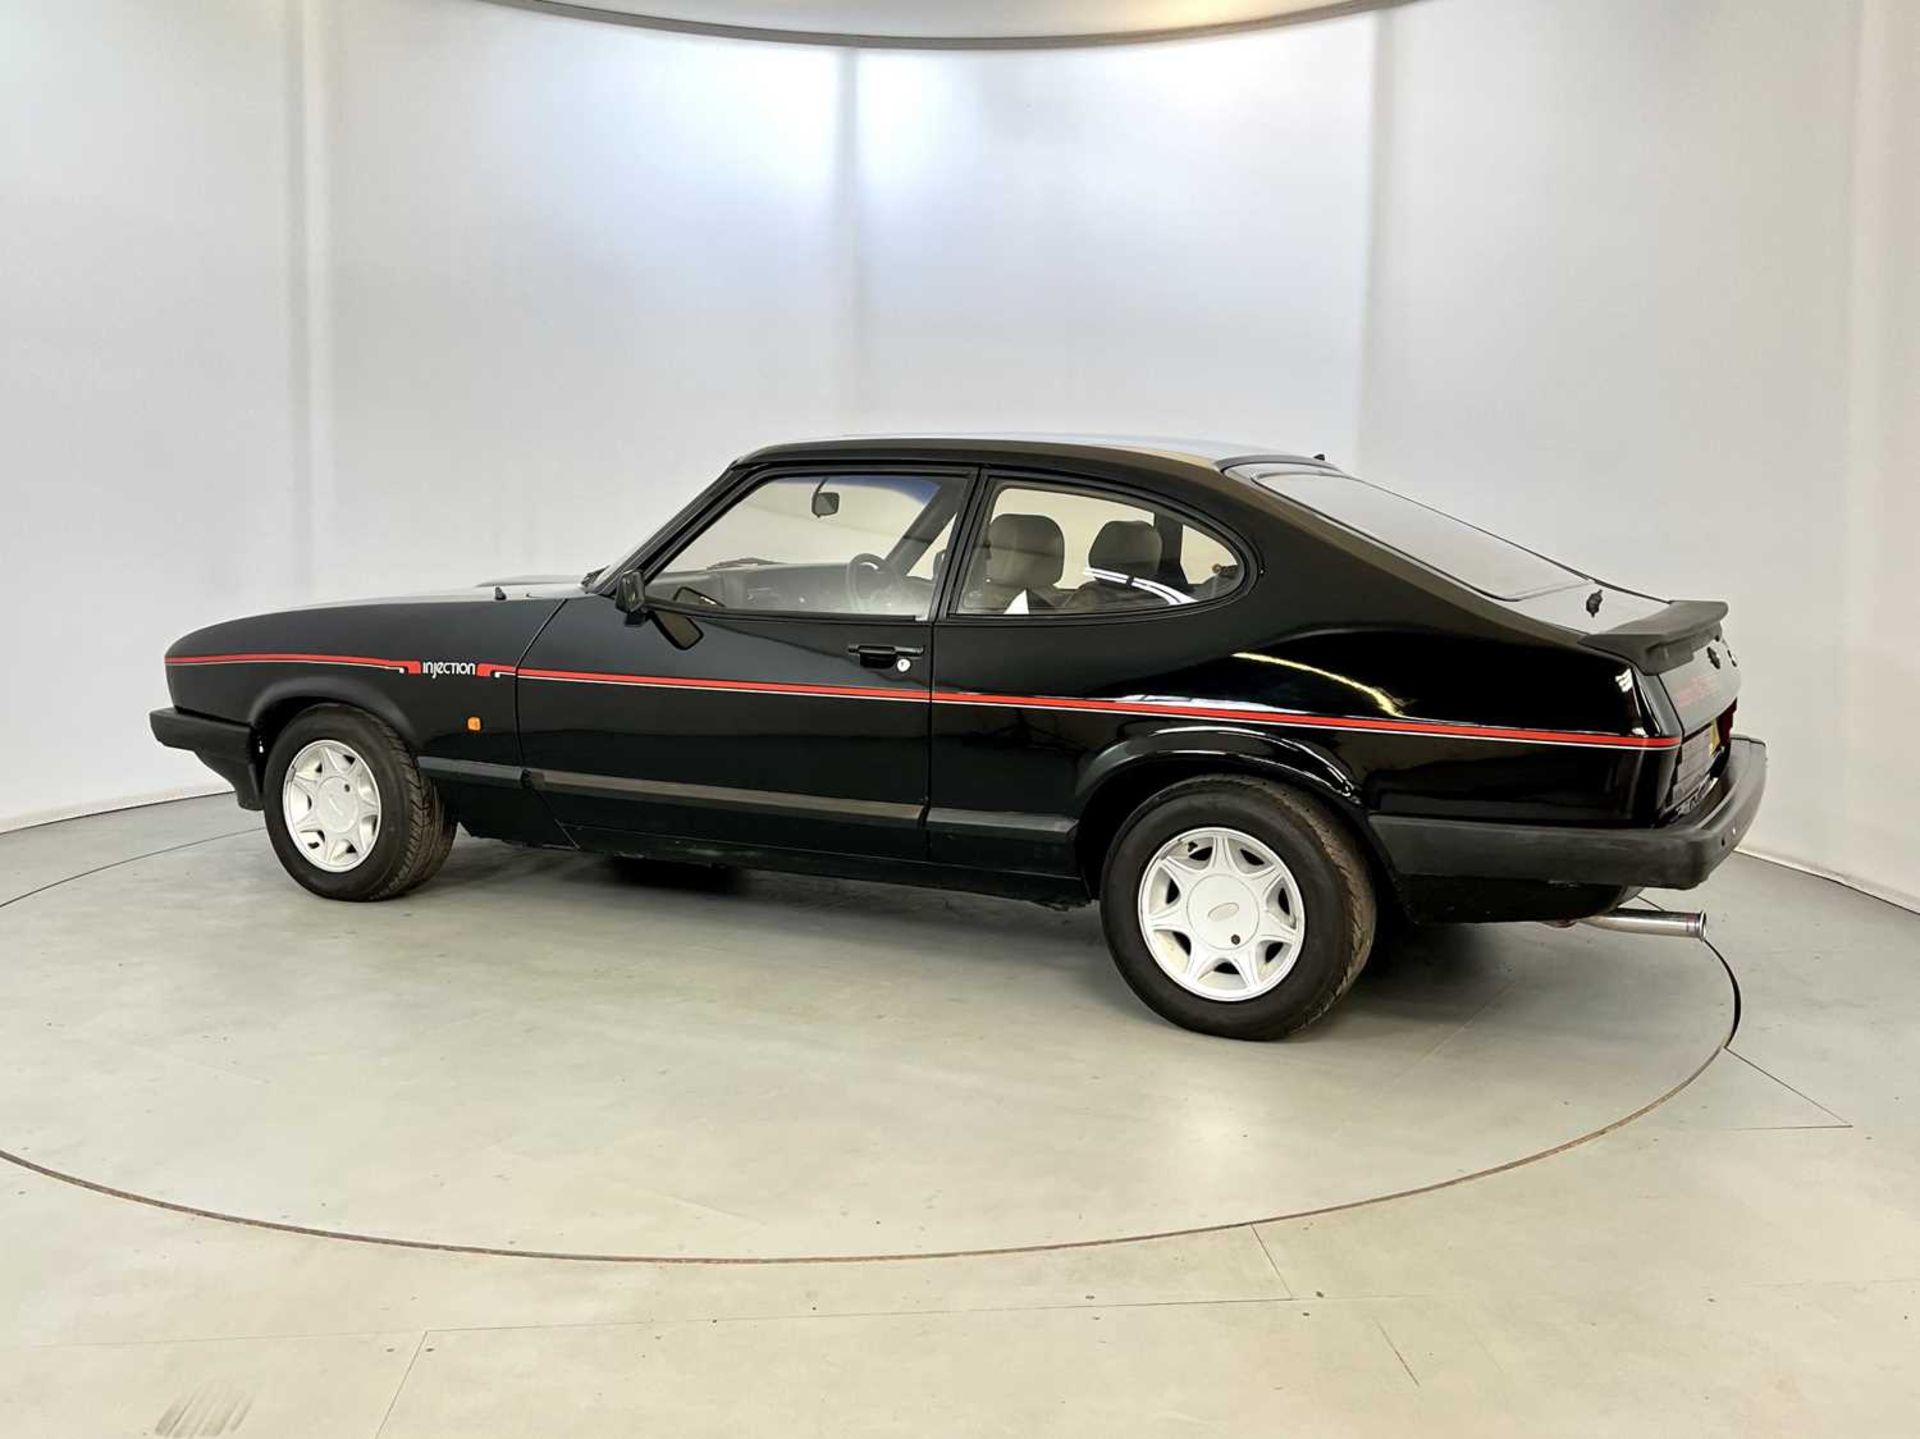 1987 Ford Capri 2.8 Injection - Image 6 of 28